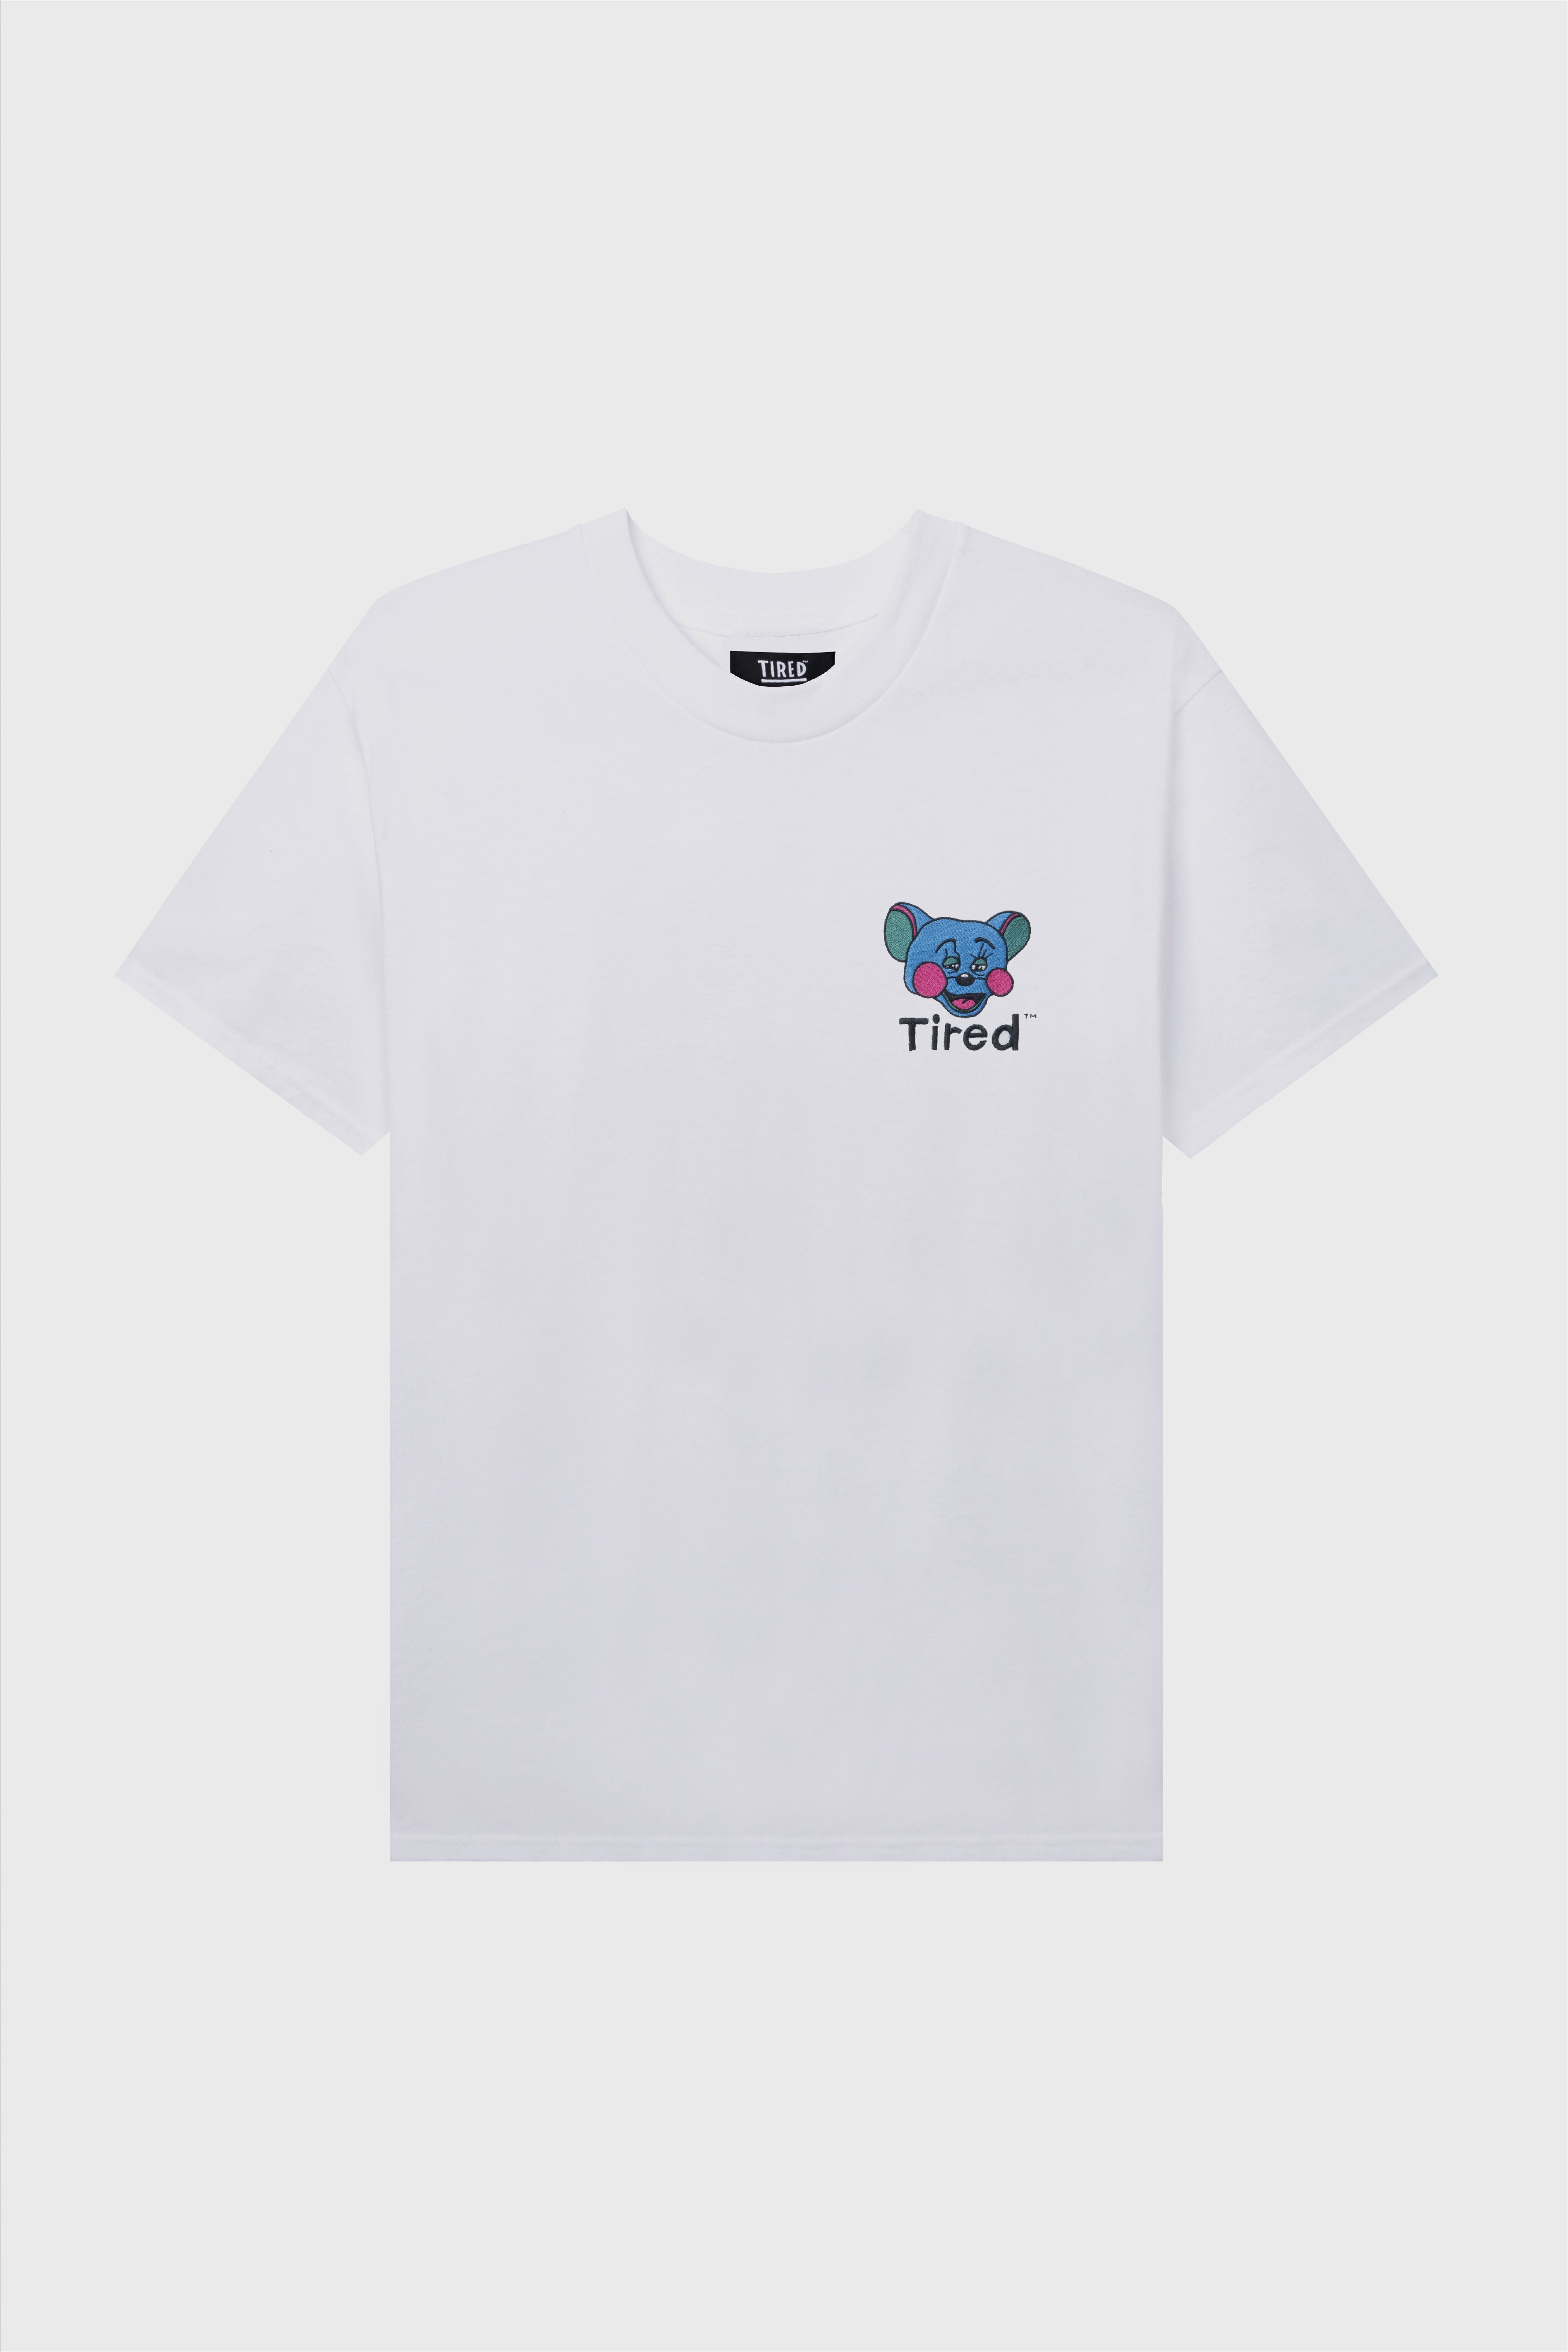 Selectshop FRAME - TIRED Tipsy Mouse Embroidered SS Tee T-Shirts Dubai